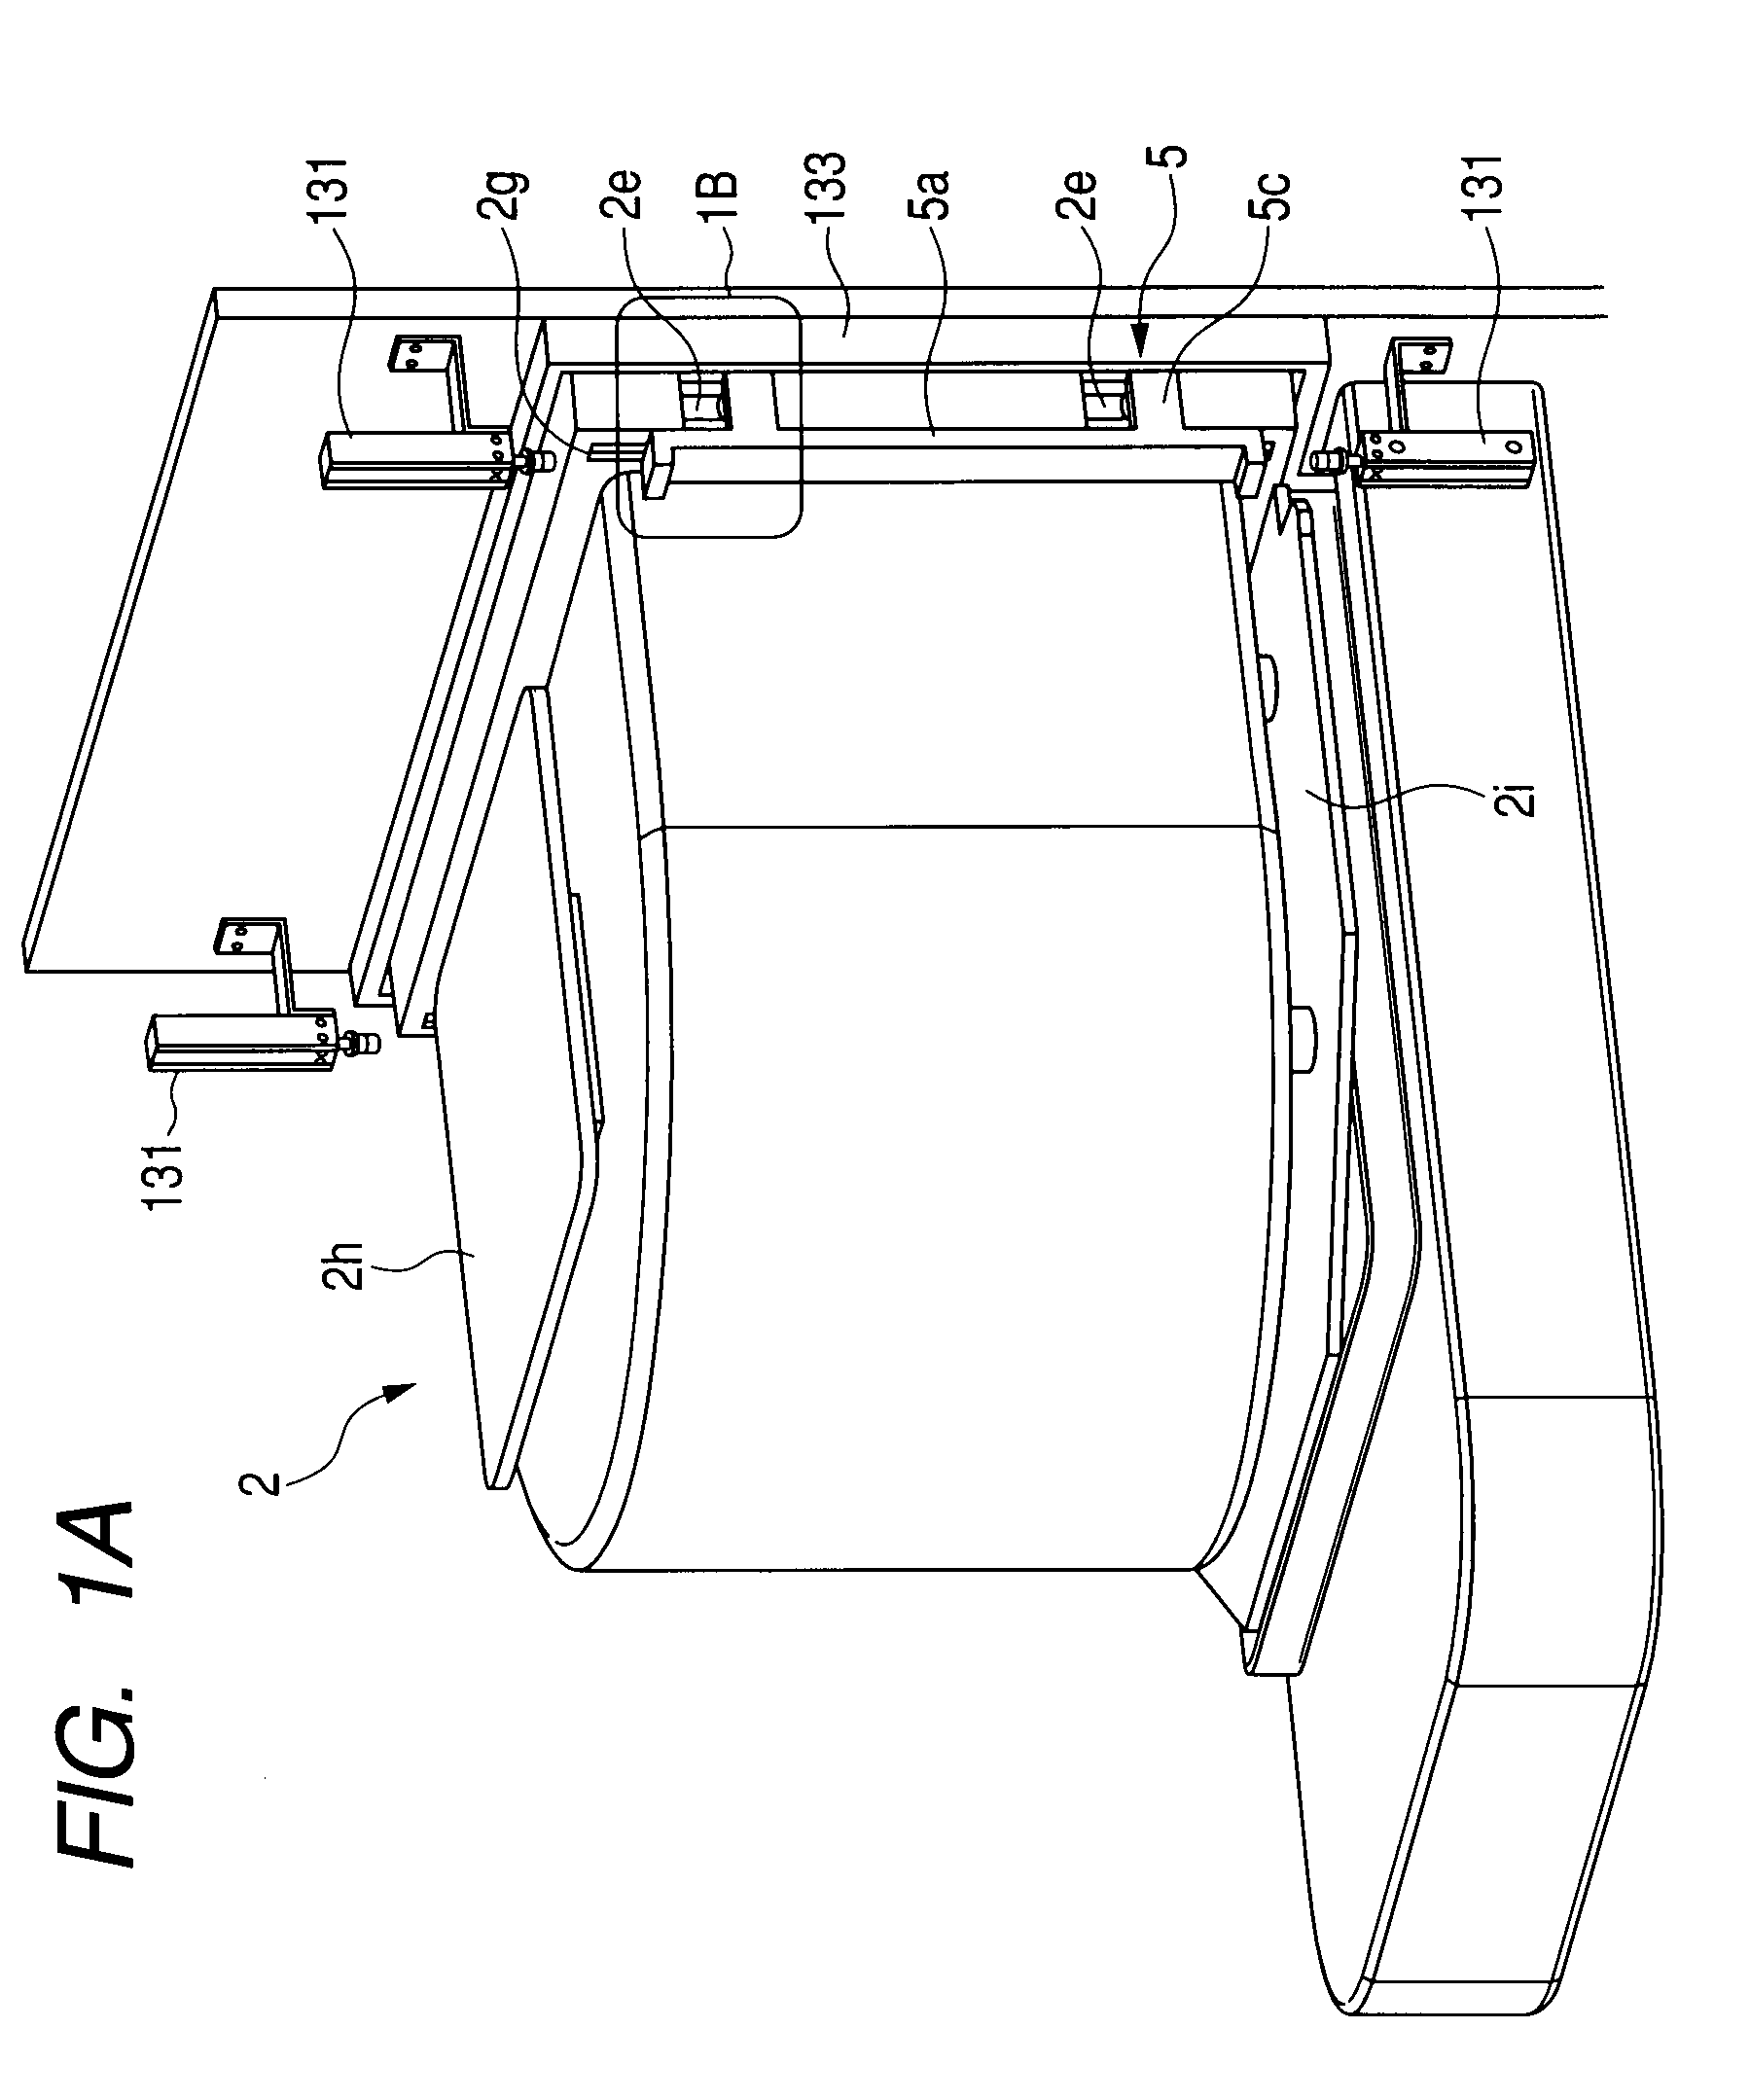 Lid opening/closing system for closed container